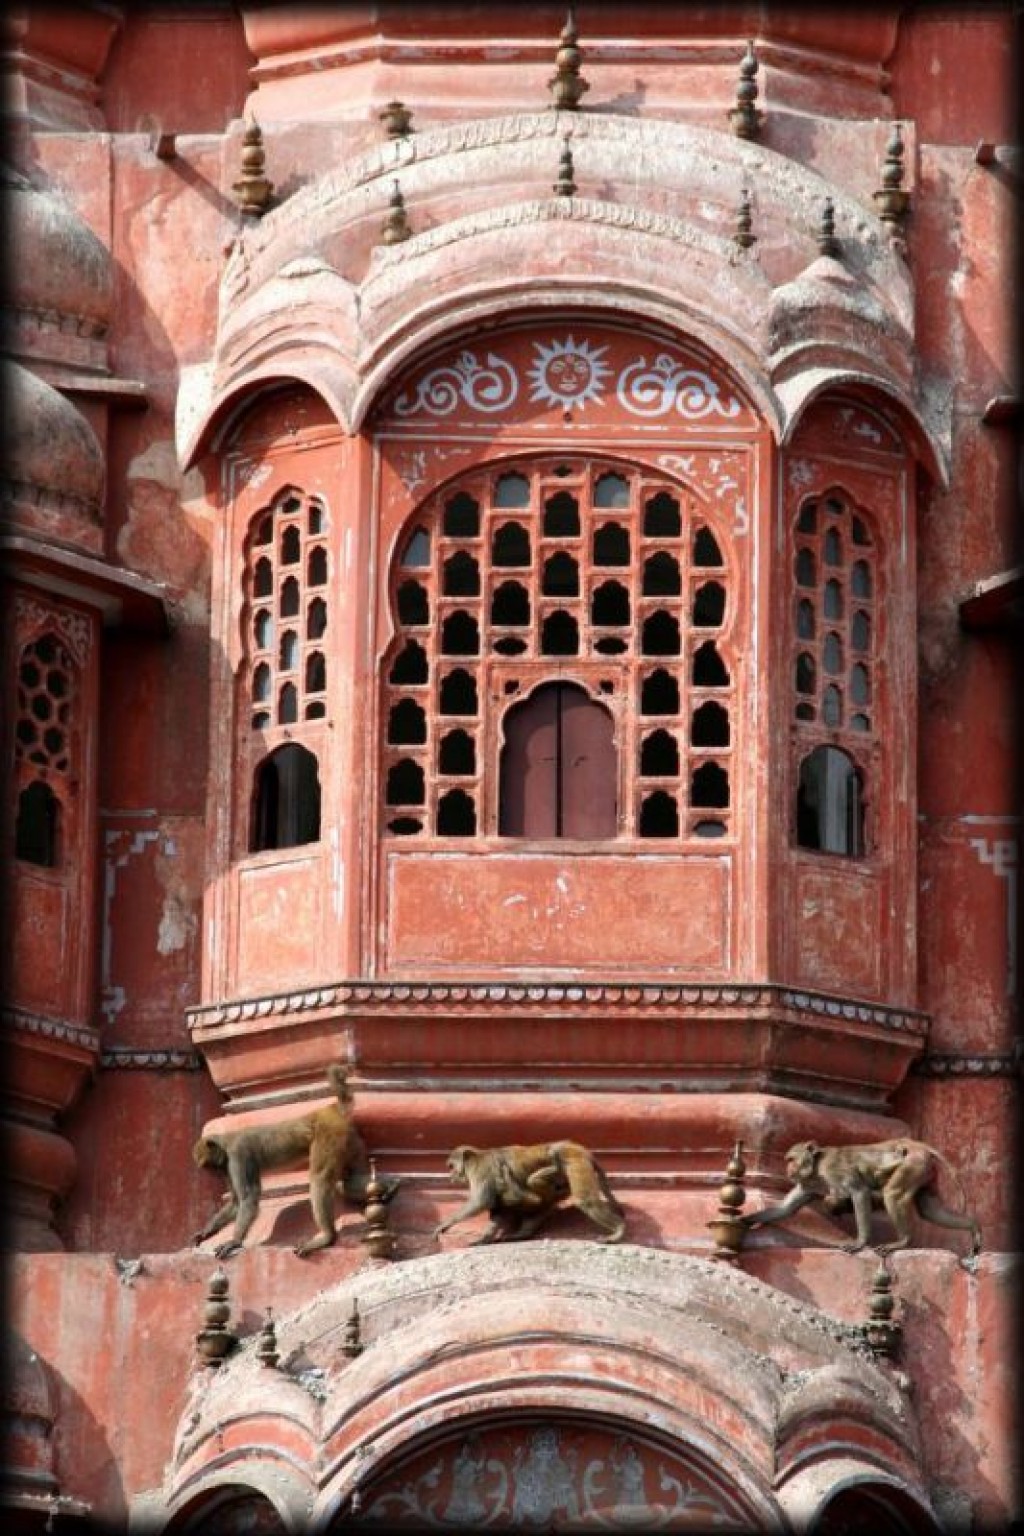 The Hawa Mahal is the famous image on every postcard of Jaipur.